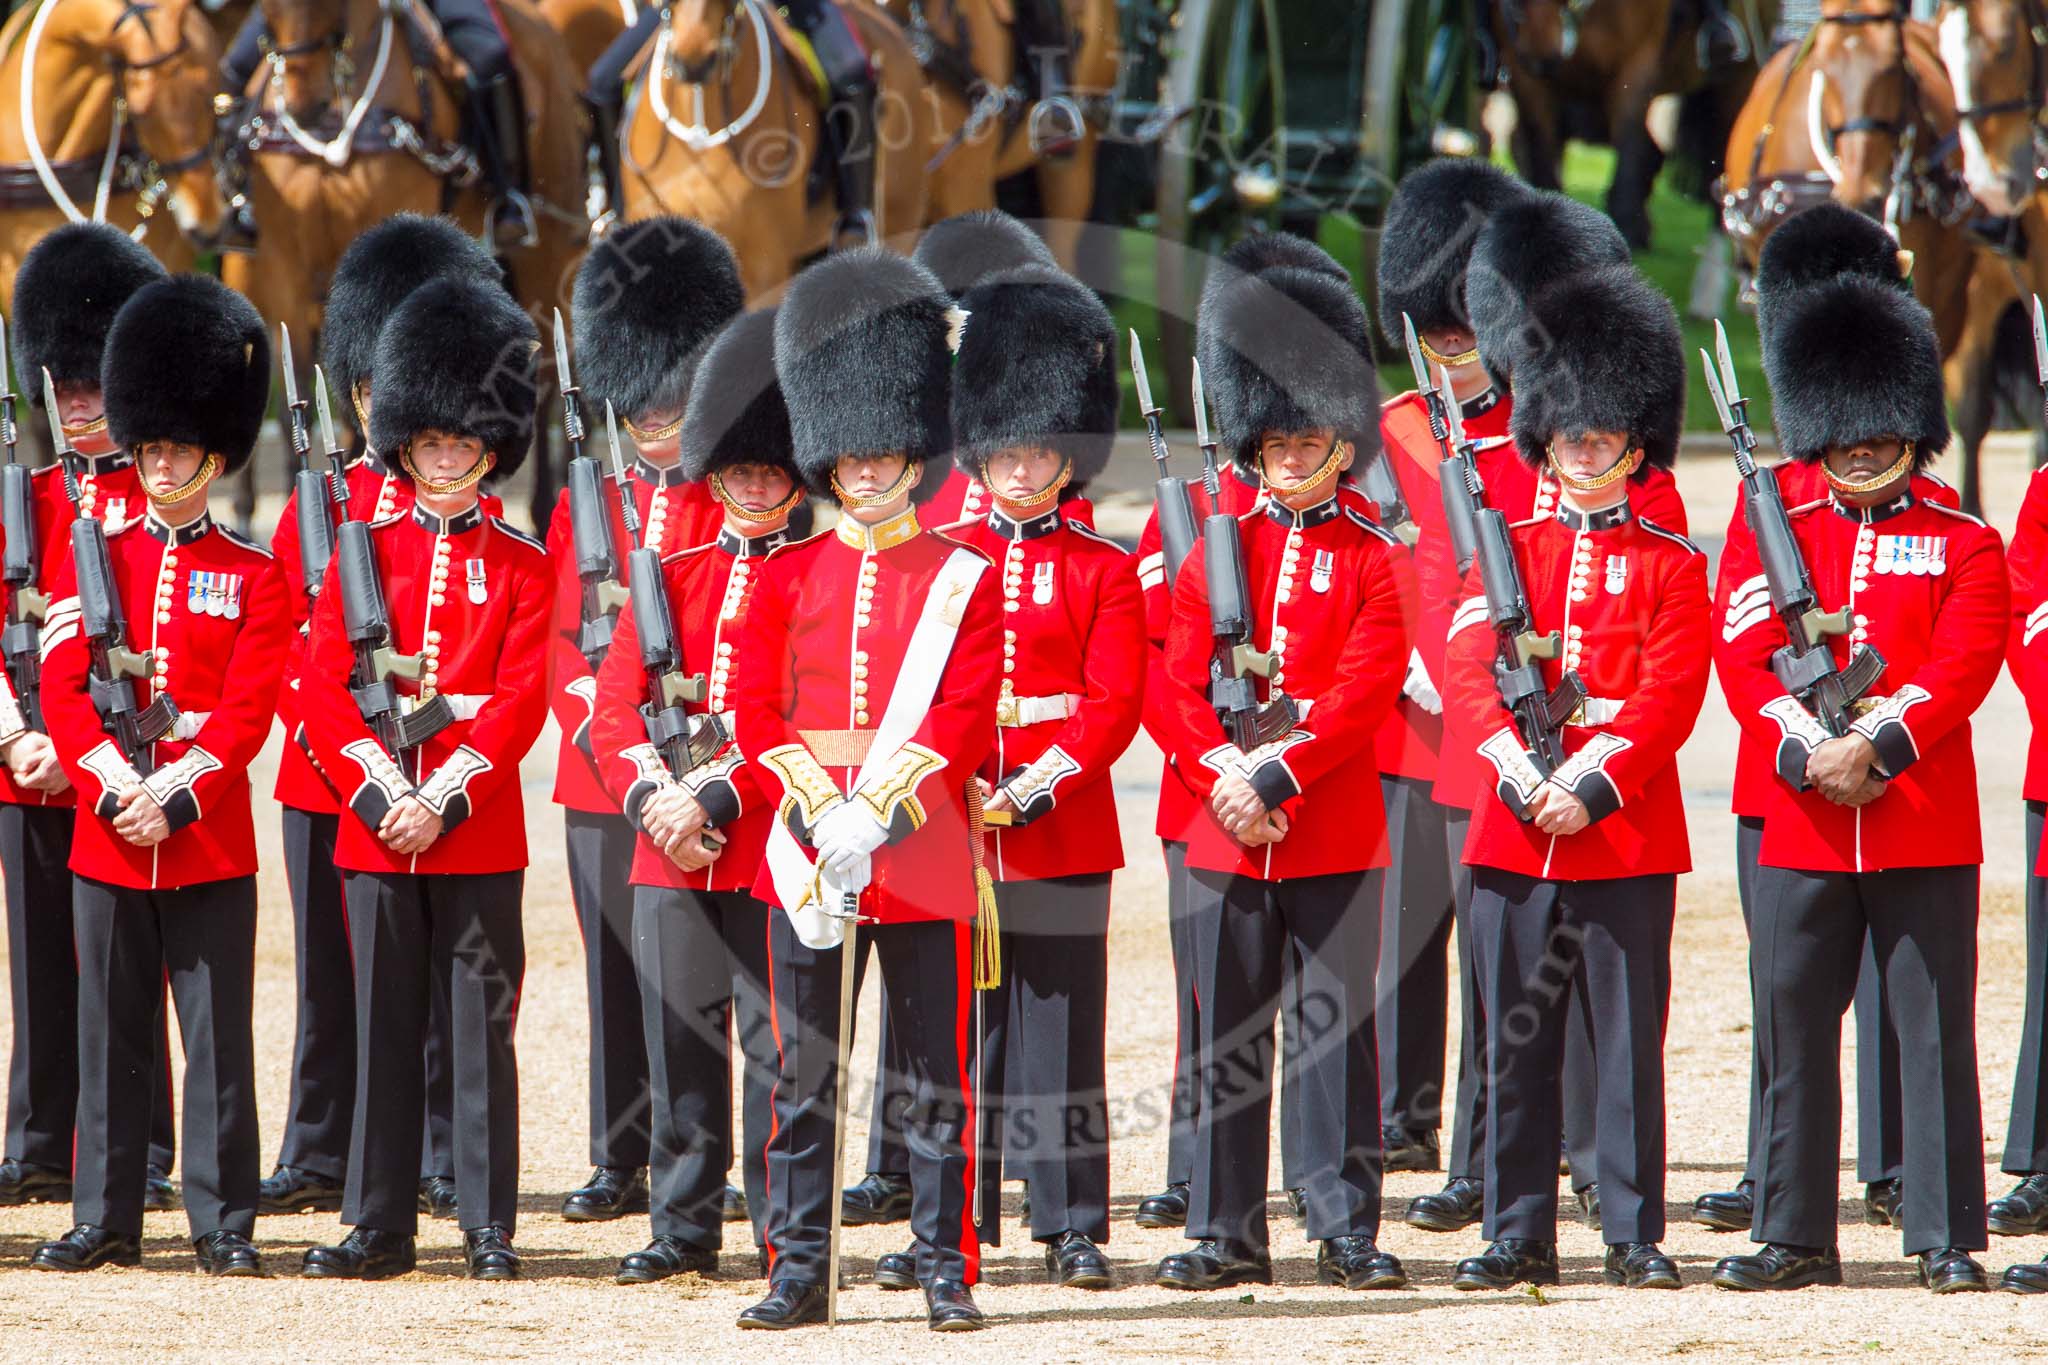 Trooping the Colour 2013: No. 1 Guard (Escort for the Colour),1st Battalion Welsh Guards, with the Ensign that will troop the Colour through the ranks. Image #225, 15 June 2013 10:55 Horse Guards Parade, London, UK